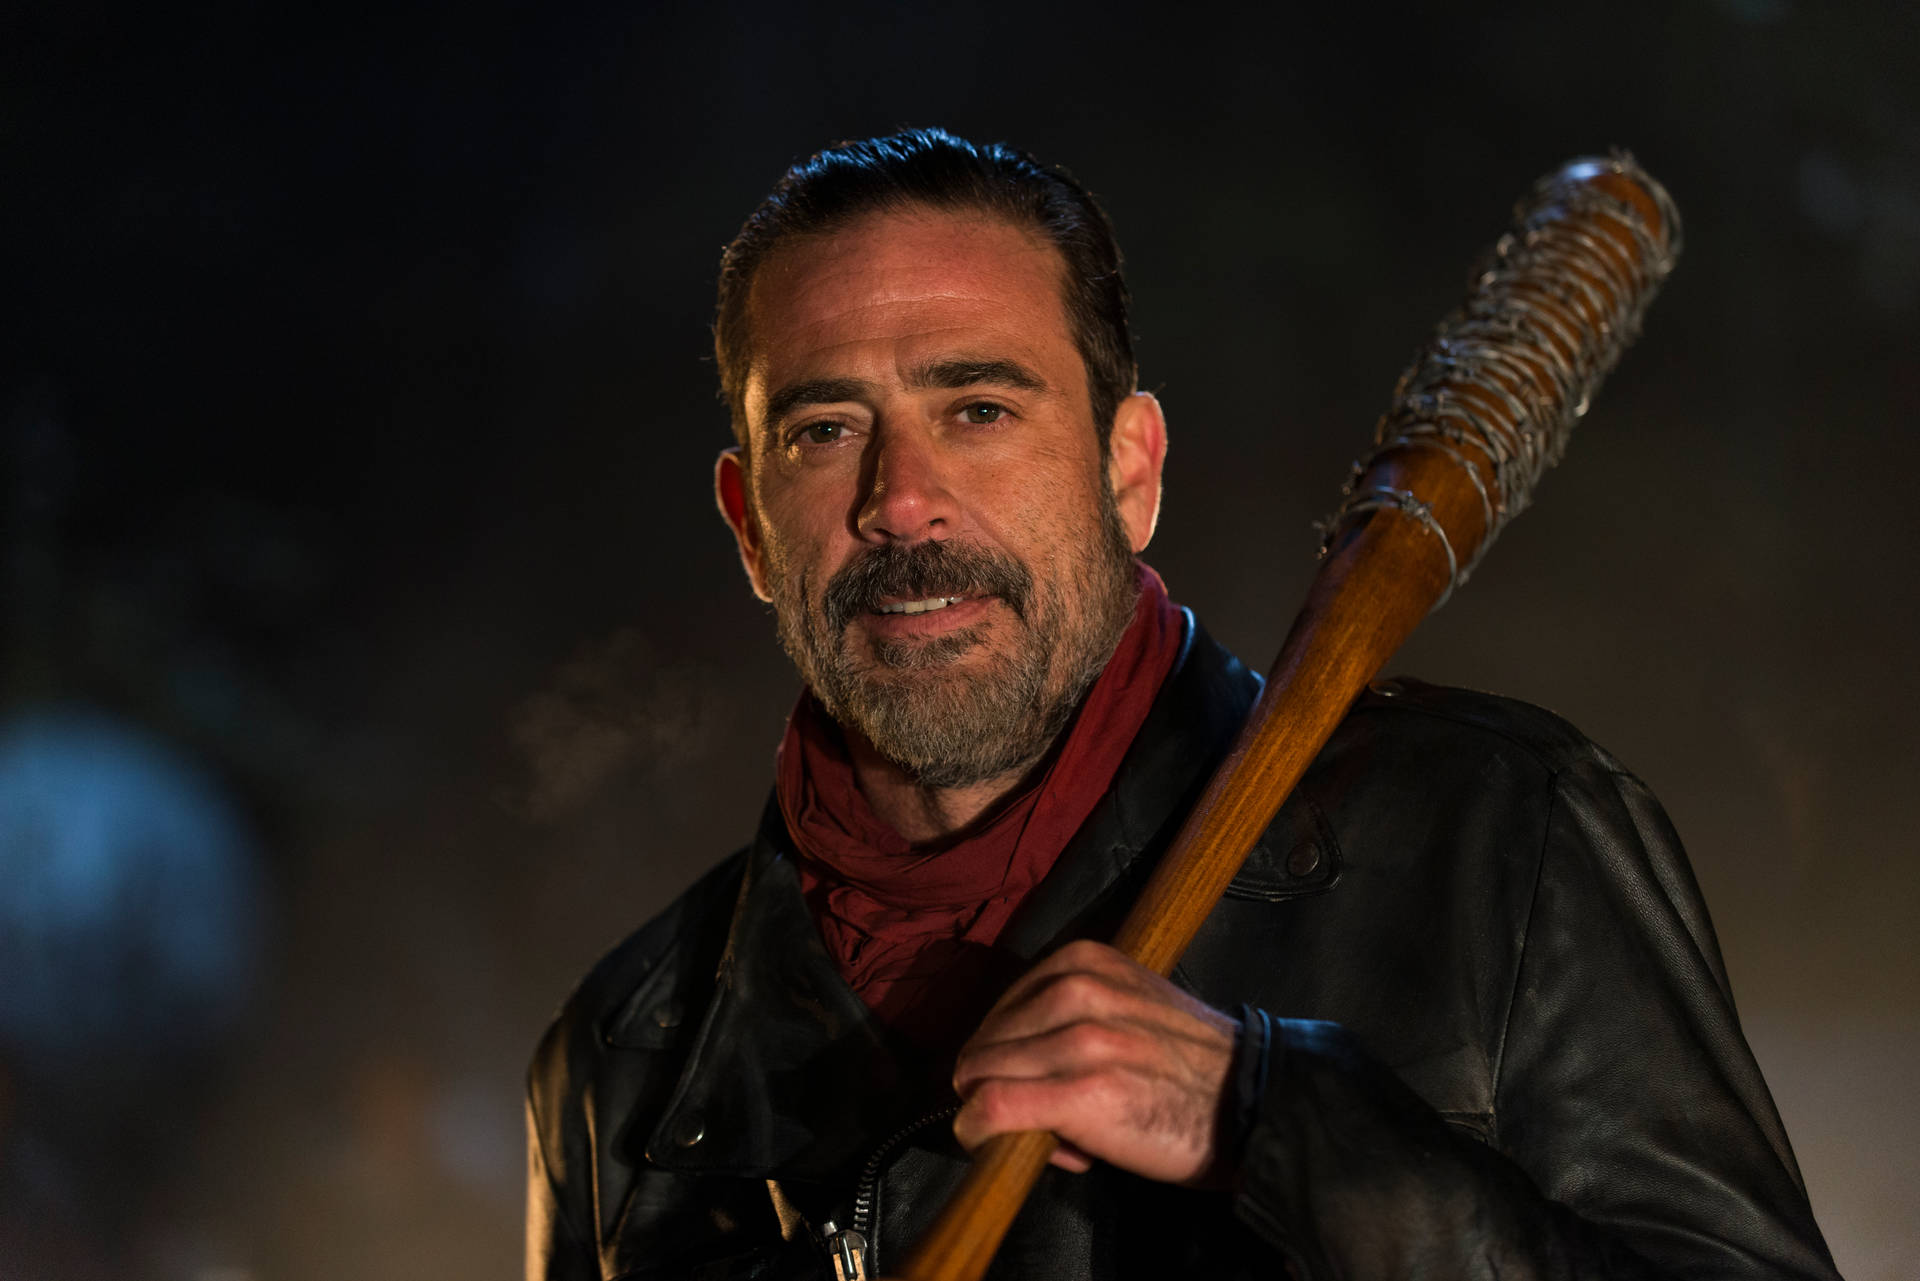 Negan With A Small Smile